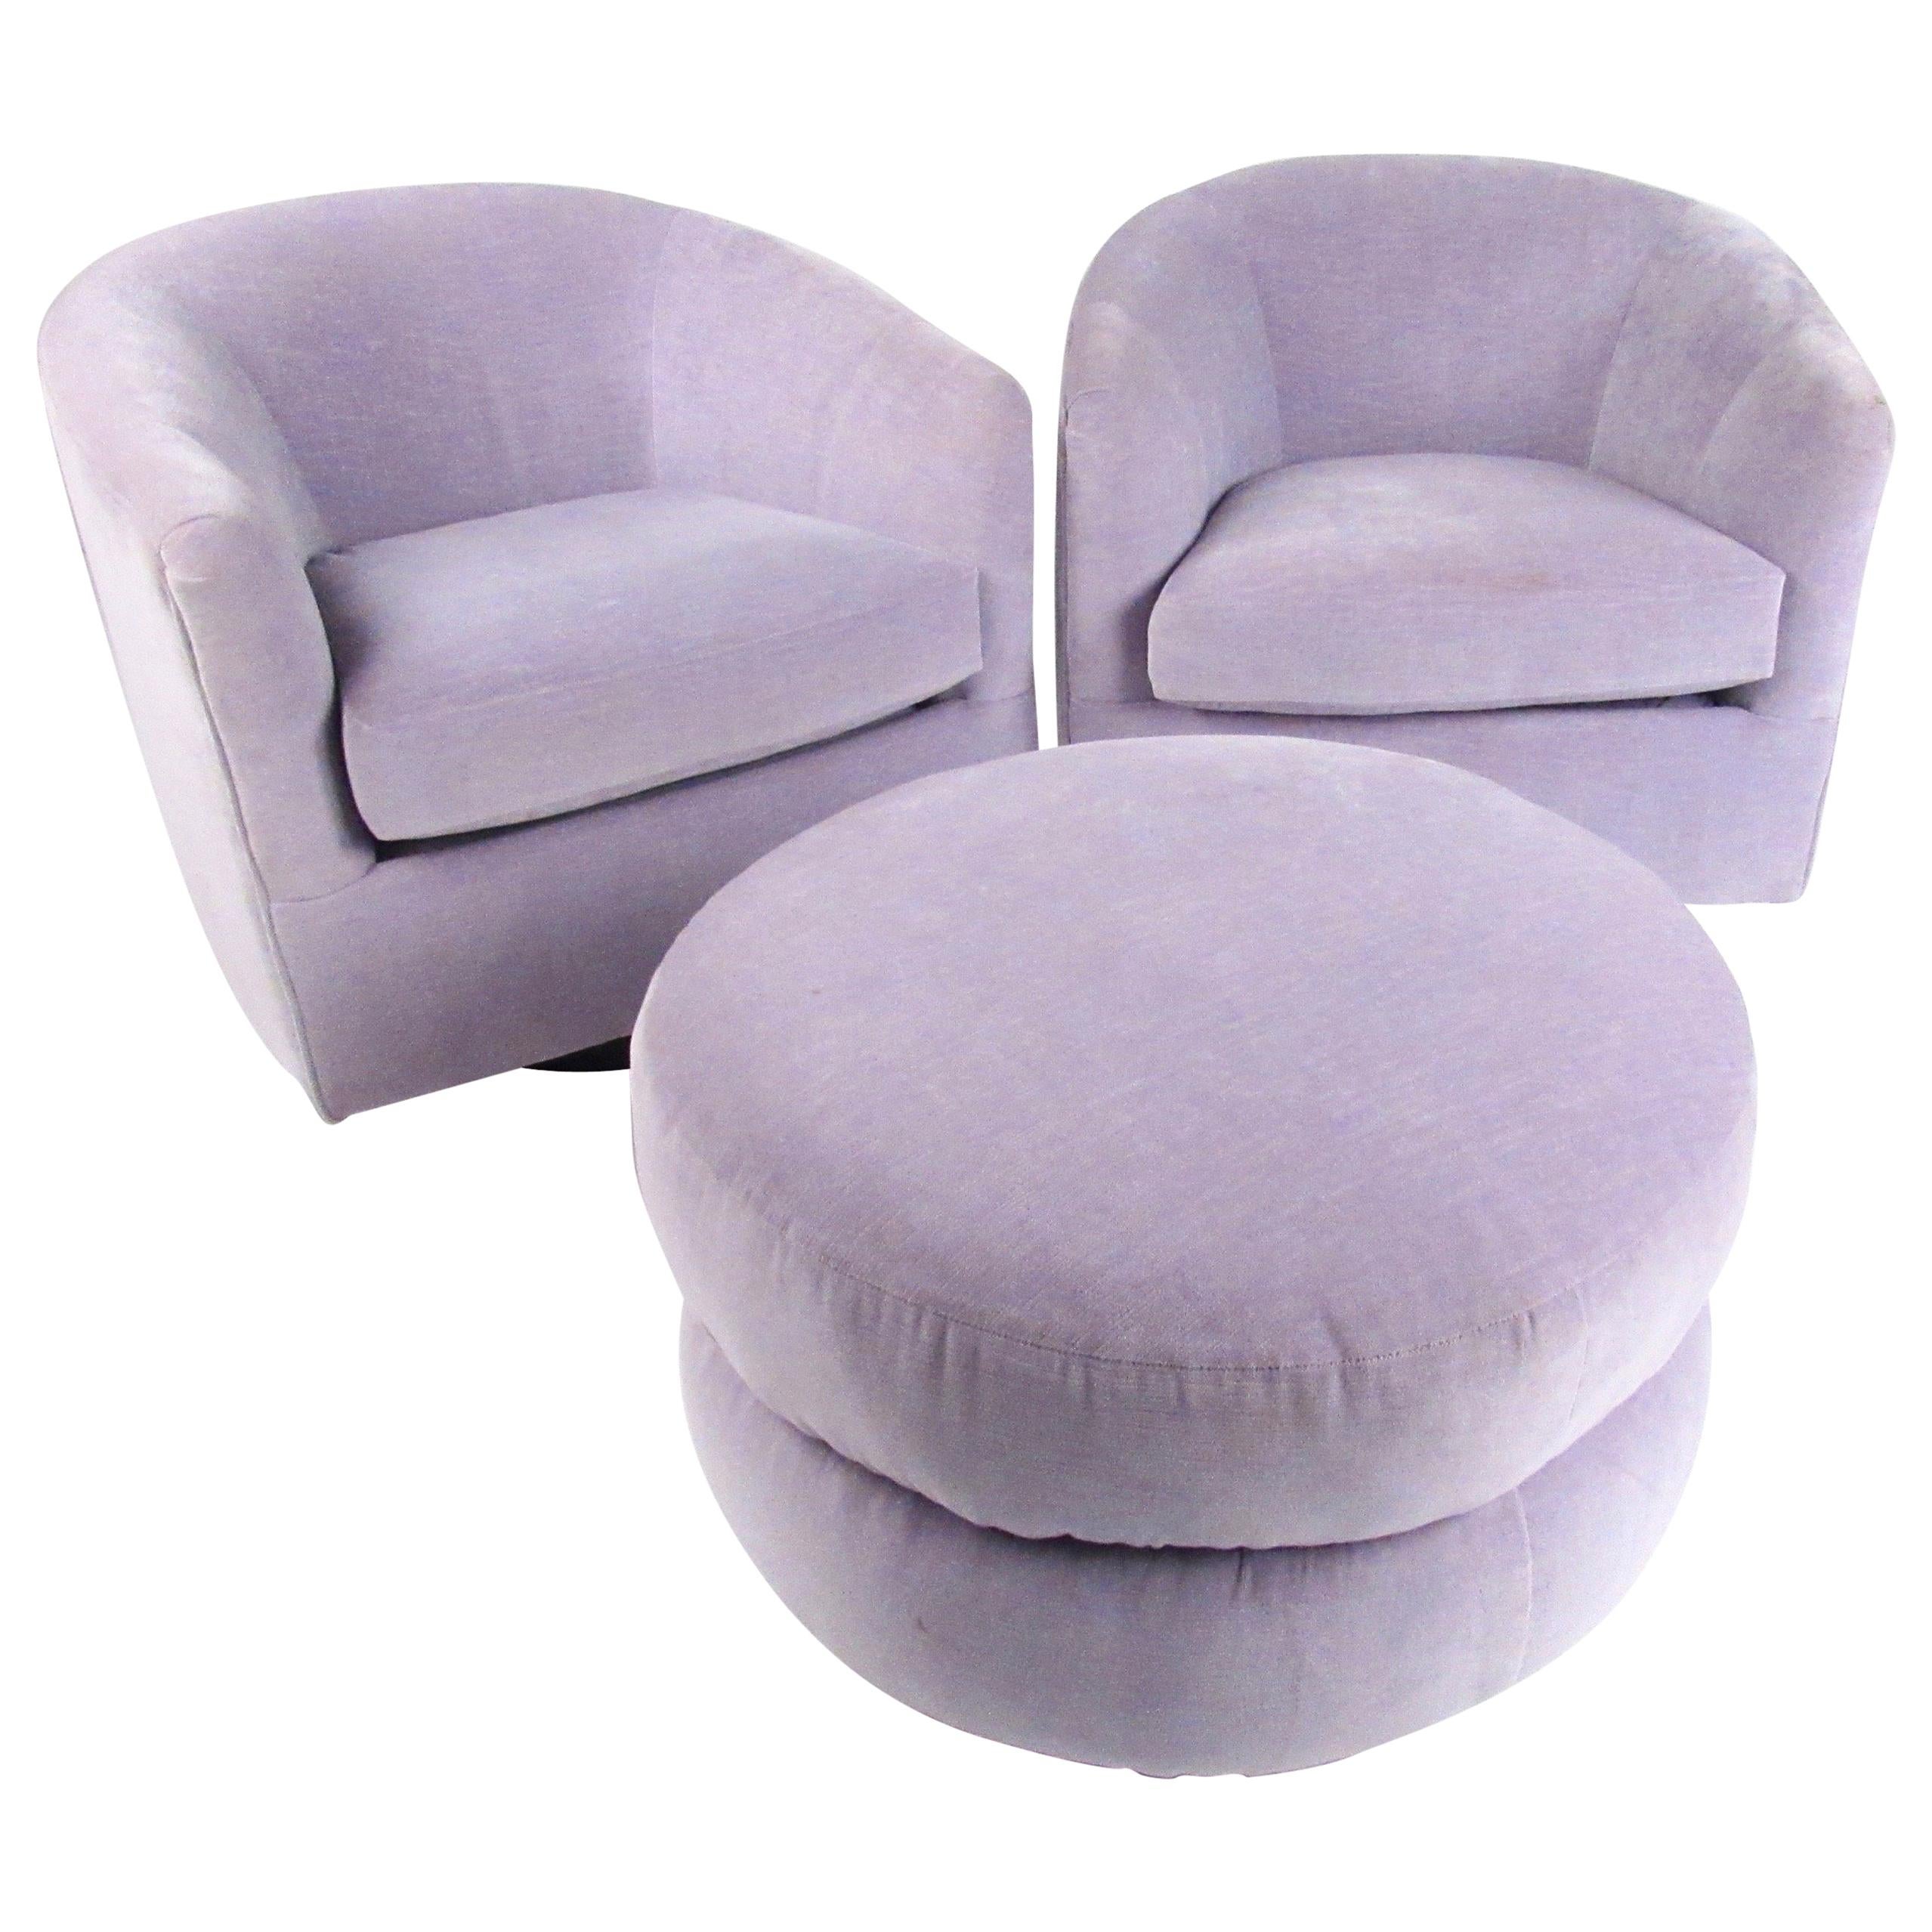 Pair of Vintage Swivel Club Chairs with Ottoman